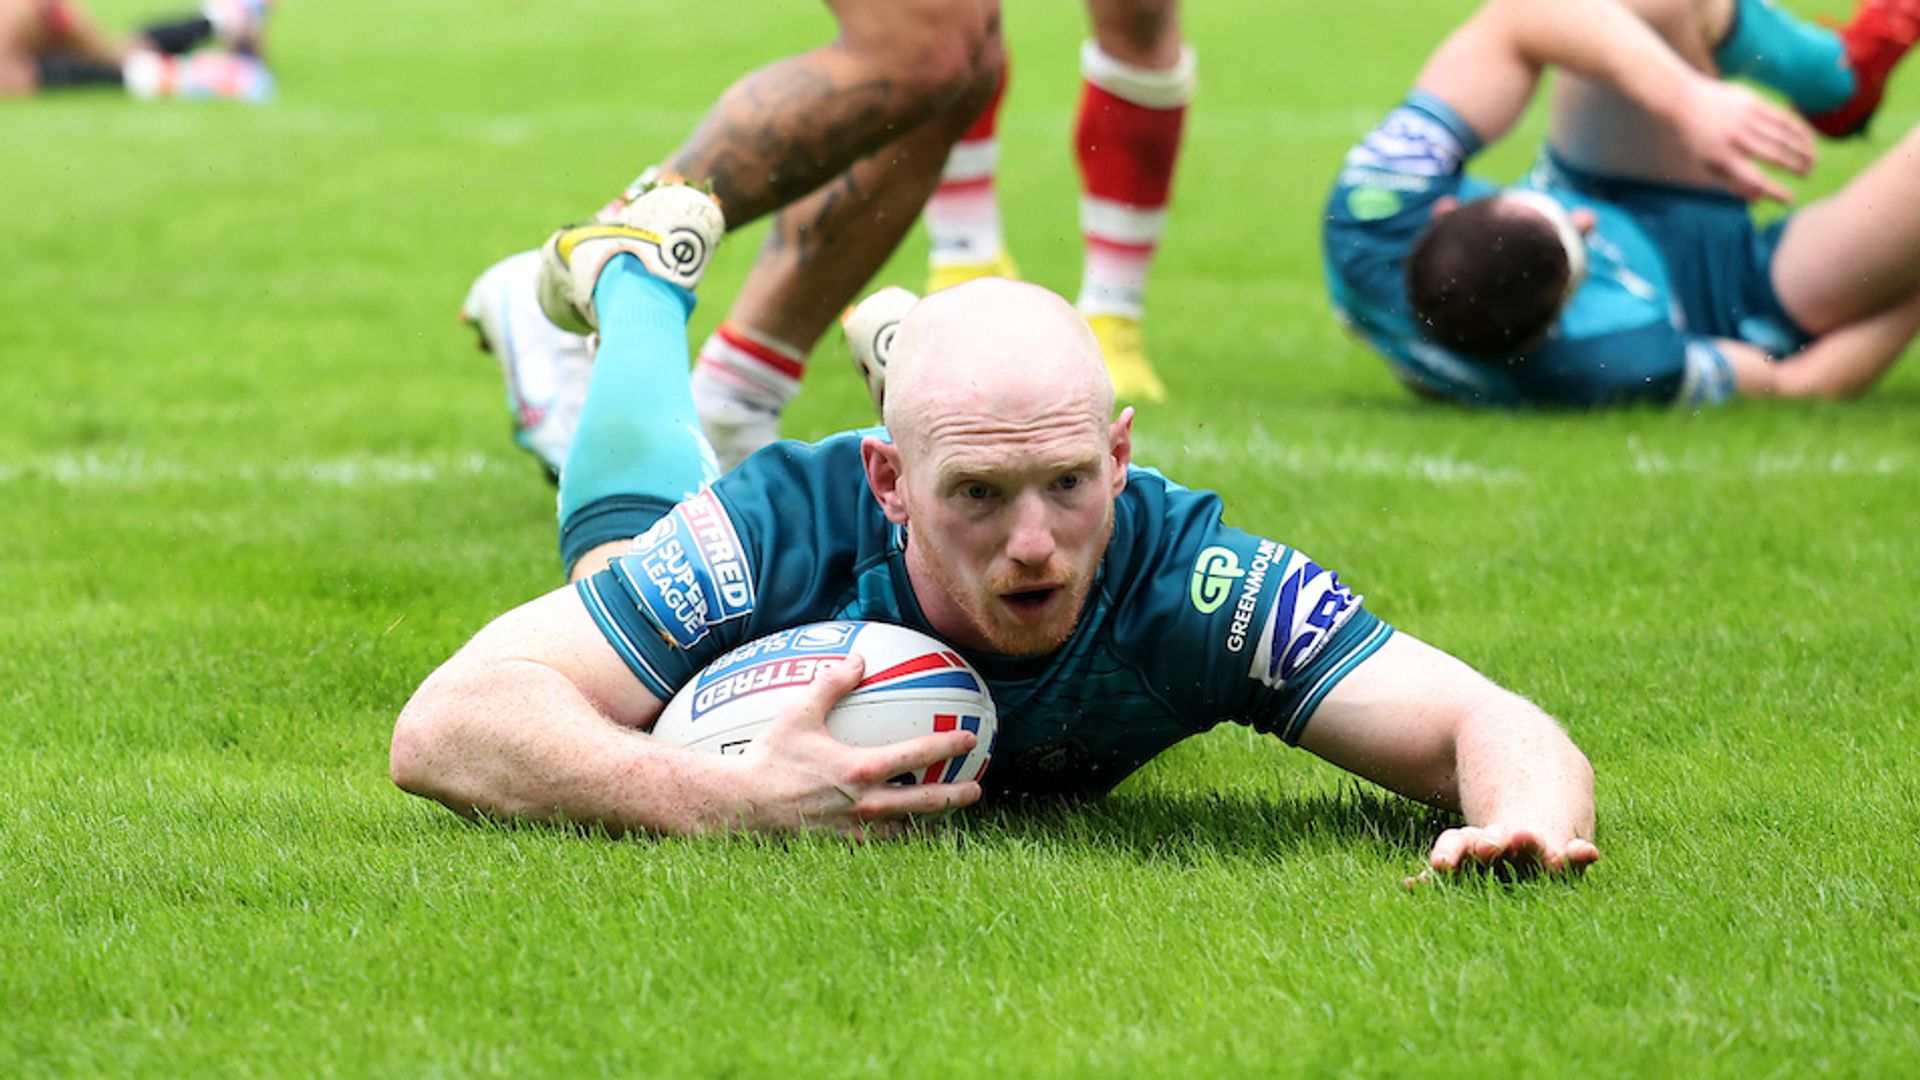 Farrell scores double as Wigan climb to third with victory over Salford